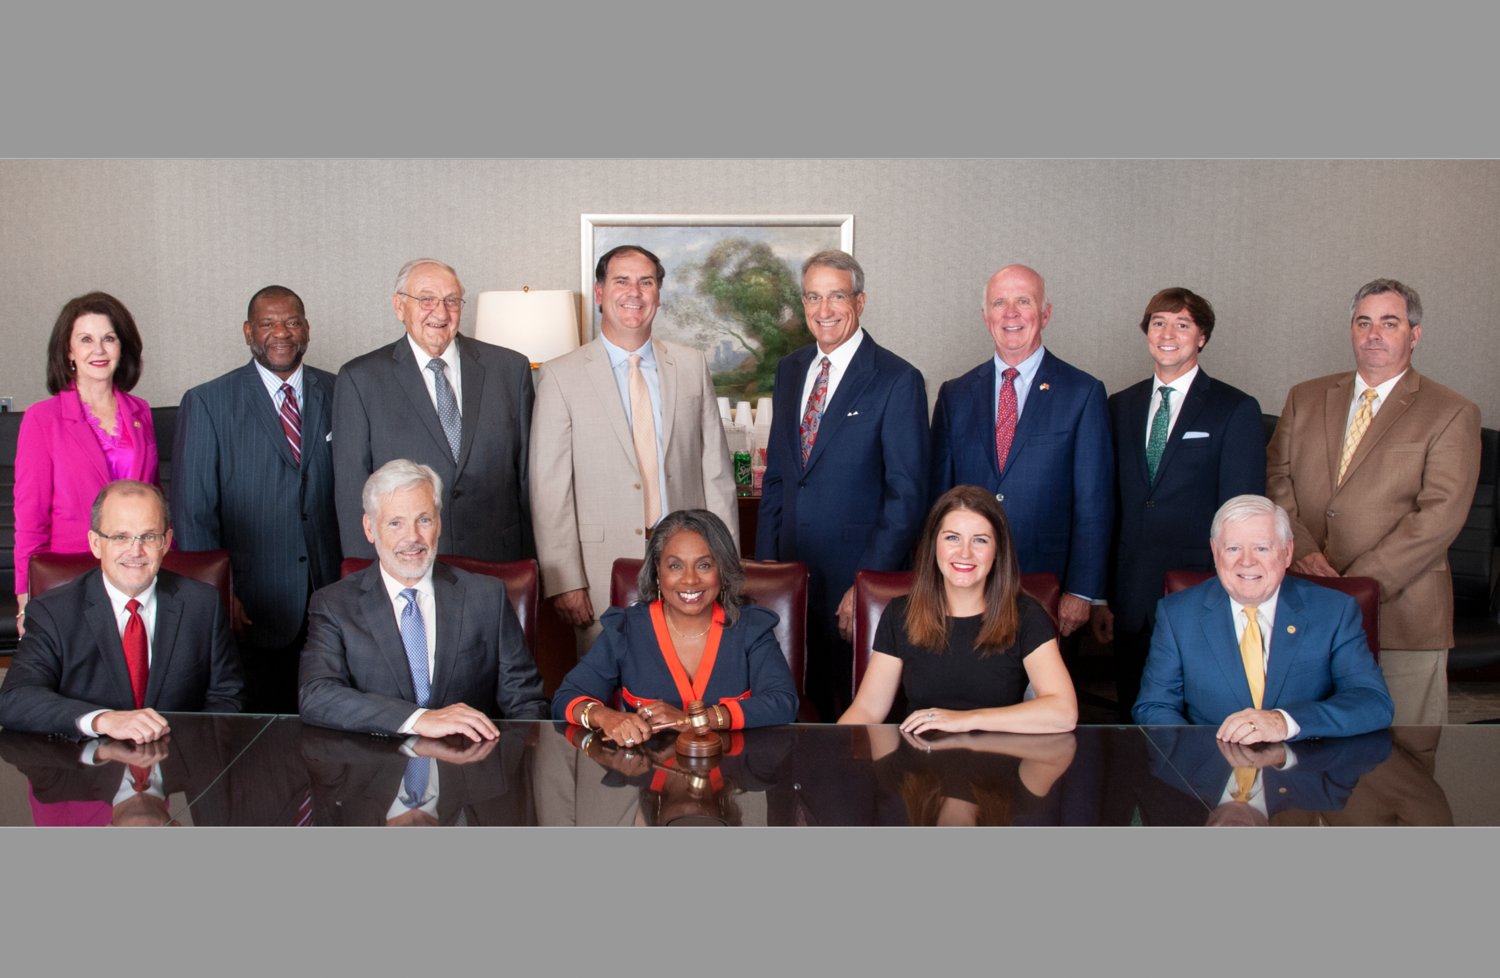 Pictured are, seated from left, Sam Kelly, Brunini; Vice Chairman John Geary, Copeland Cook Taylor & Bush; Chairman Supt. Charlotte Seals. Madison County Schools; Secretary-Treasurer Katie Bryant Snell, Bryant, Songy, Snell; Immediate Past Chairman Ray Balentine, Michael Baker, International (Standing) Jan Collins, Executive Director Madison County Business League & Foundation; Alveno Castilla, Butler Snow; Doug Jones, MCEDA Appointee; Wint McGee, MCEDA Appointee; Gerard Gibert, MCEDA Appointee; Dr. Ronnie McGehee, McGehee, LLC : Chris Roberts, BankPlus; and Stan Wright, Neel-Schaffer. Not pictured are Carl Watts, Olde Towne Cleaners, Calvin Harris, MCEDA Appointee; Dr. Phyllis Johnson, MS Board of Nursing; Nicky Cobb, Renasant Bank